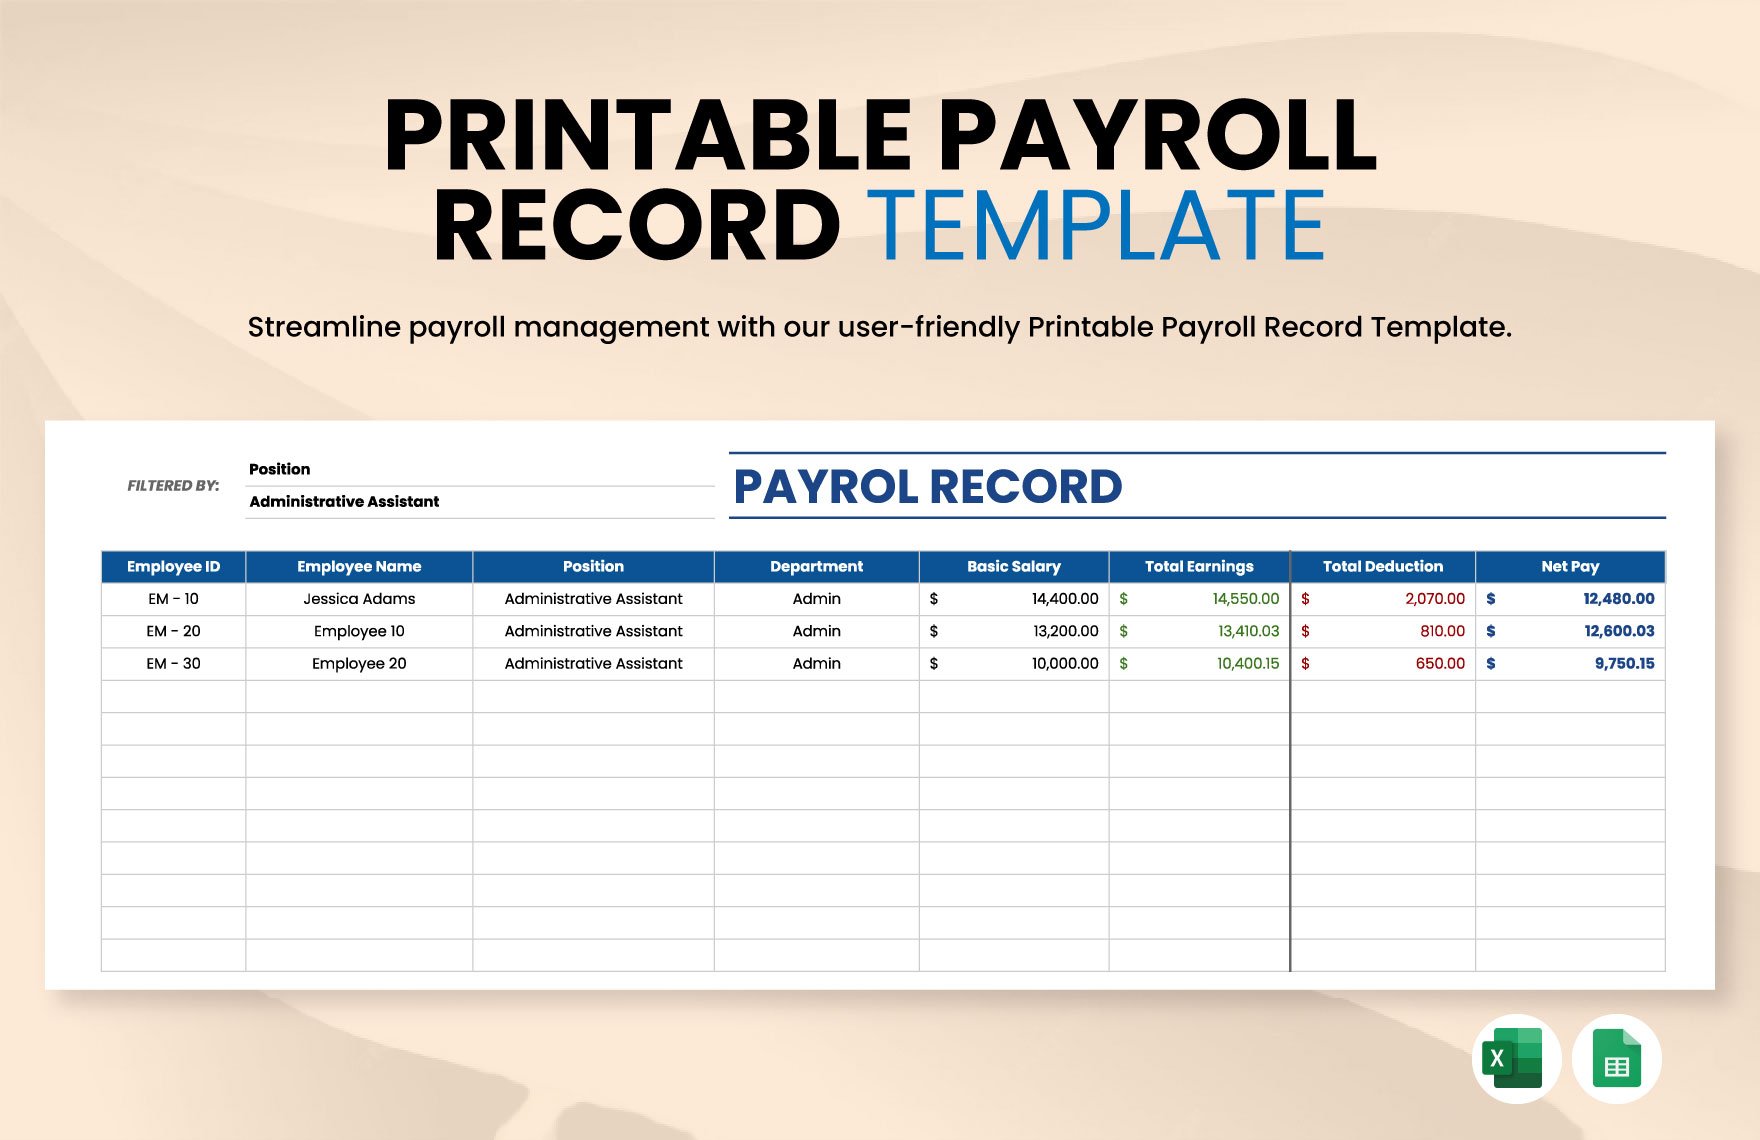 Printable Payroll Record Template in Excel, Google Sheets